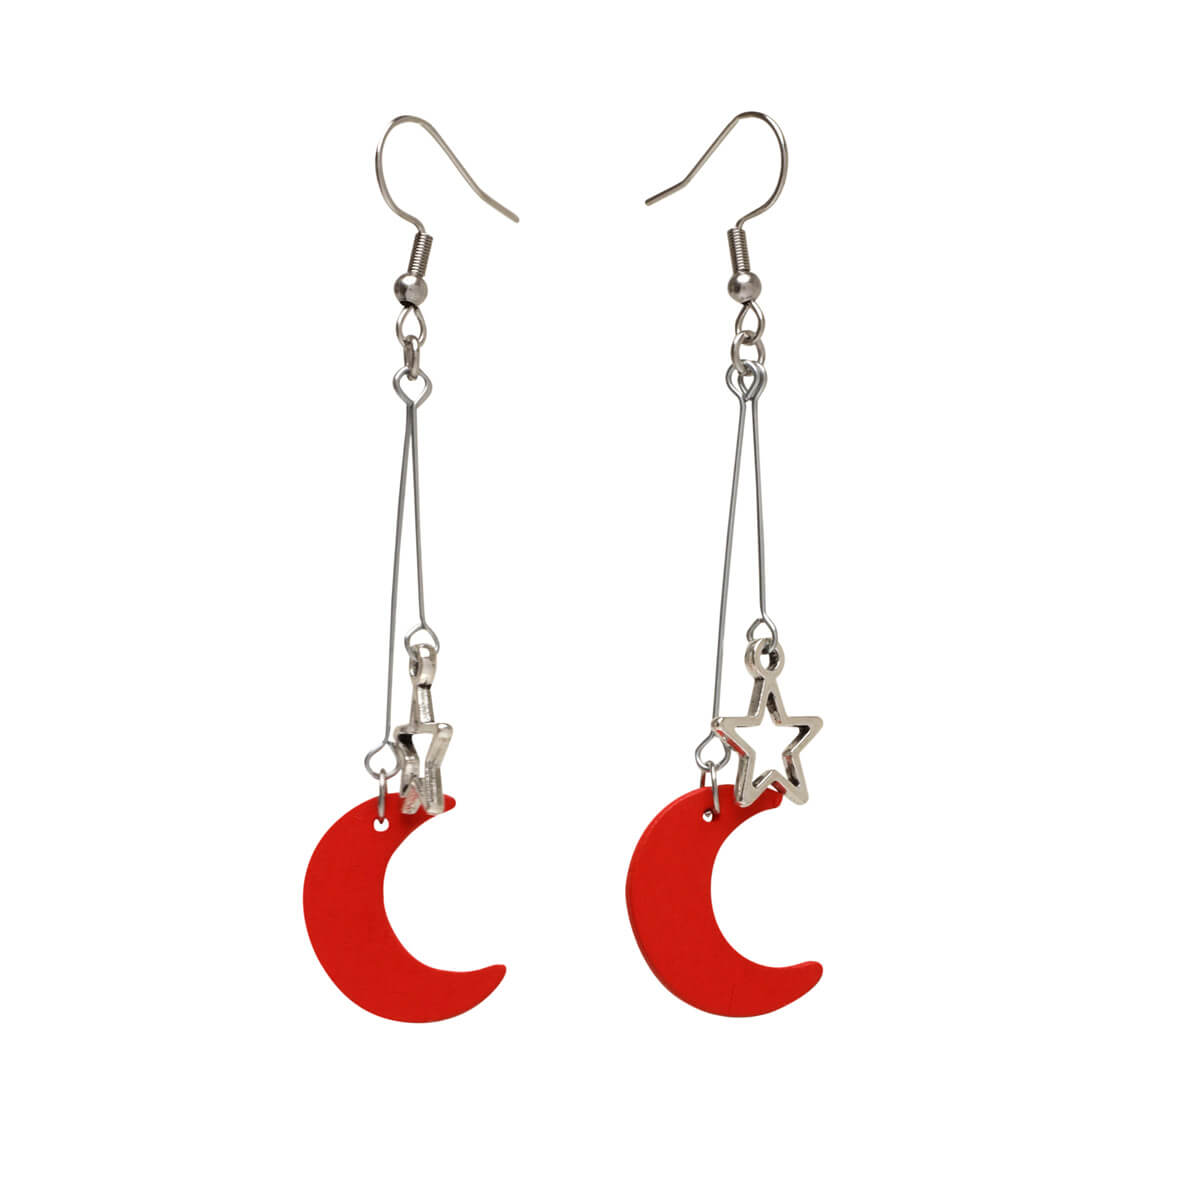 Moon and stars earring - Made in Finland (Steel 316L)